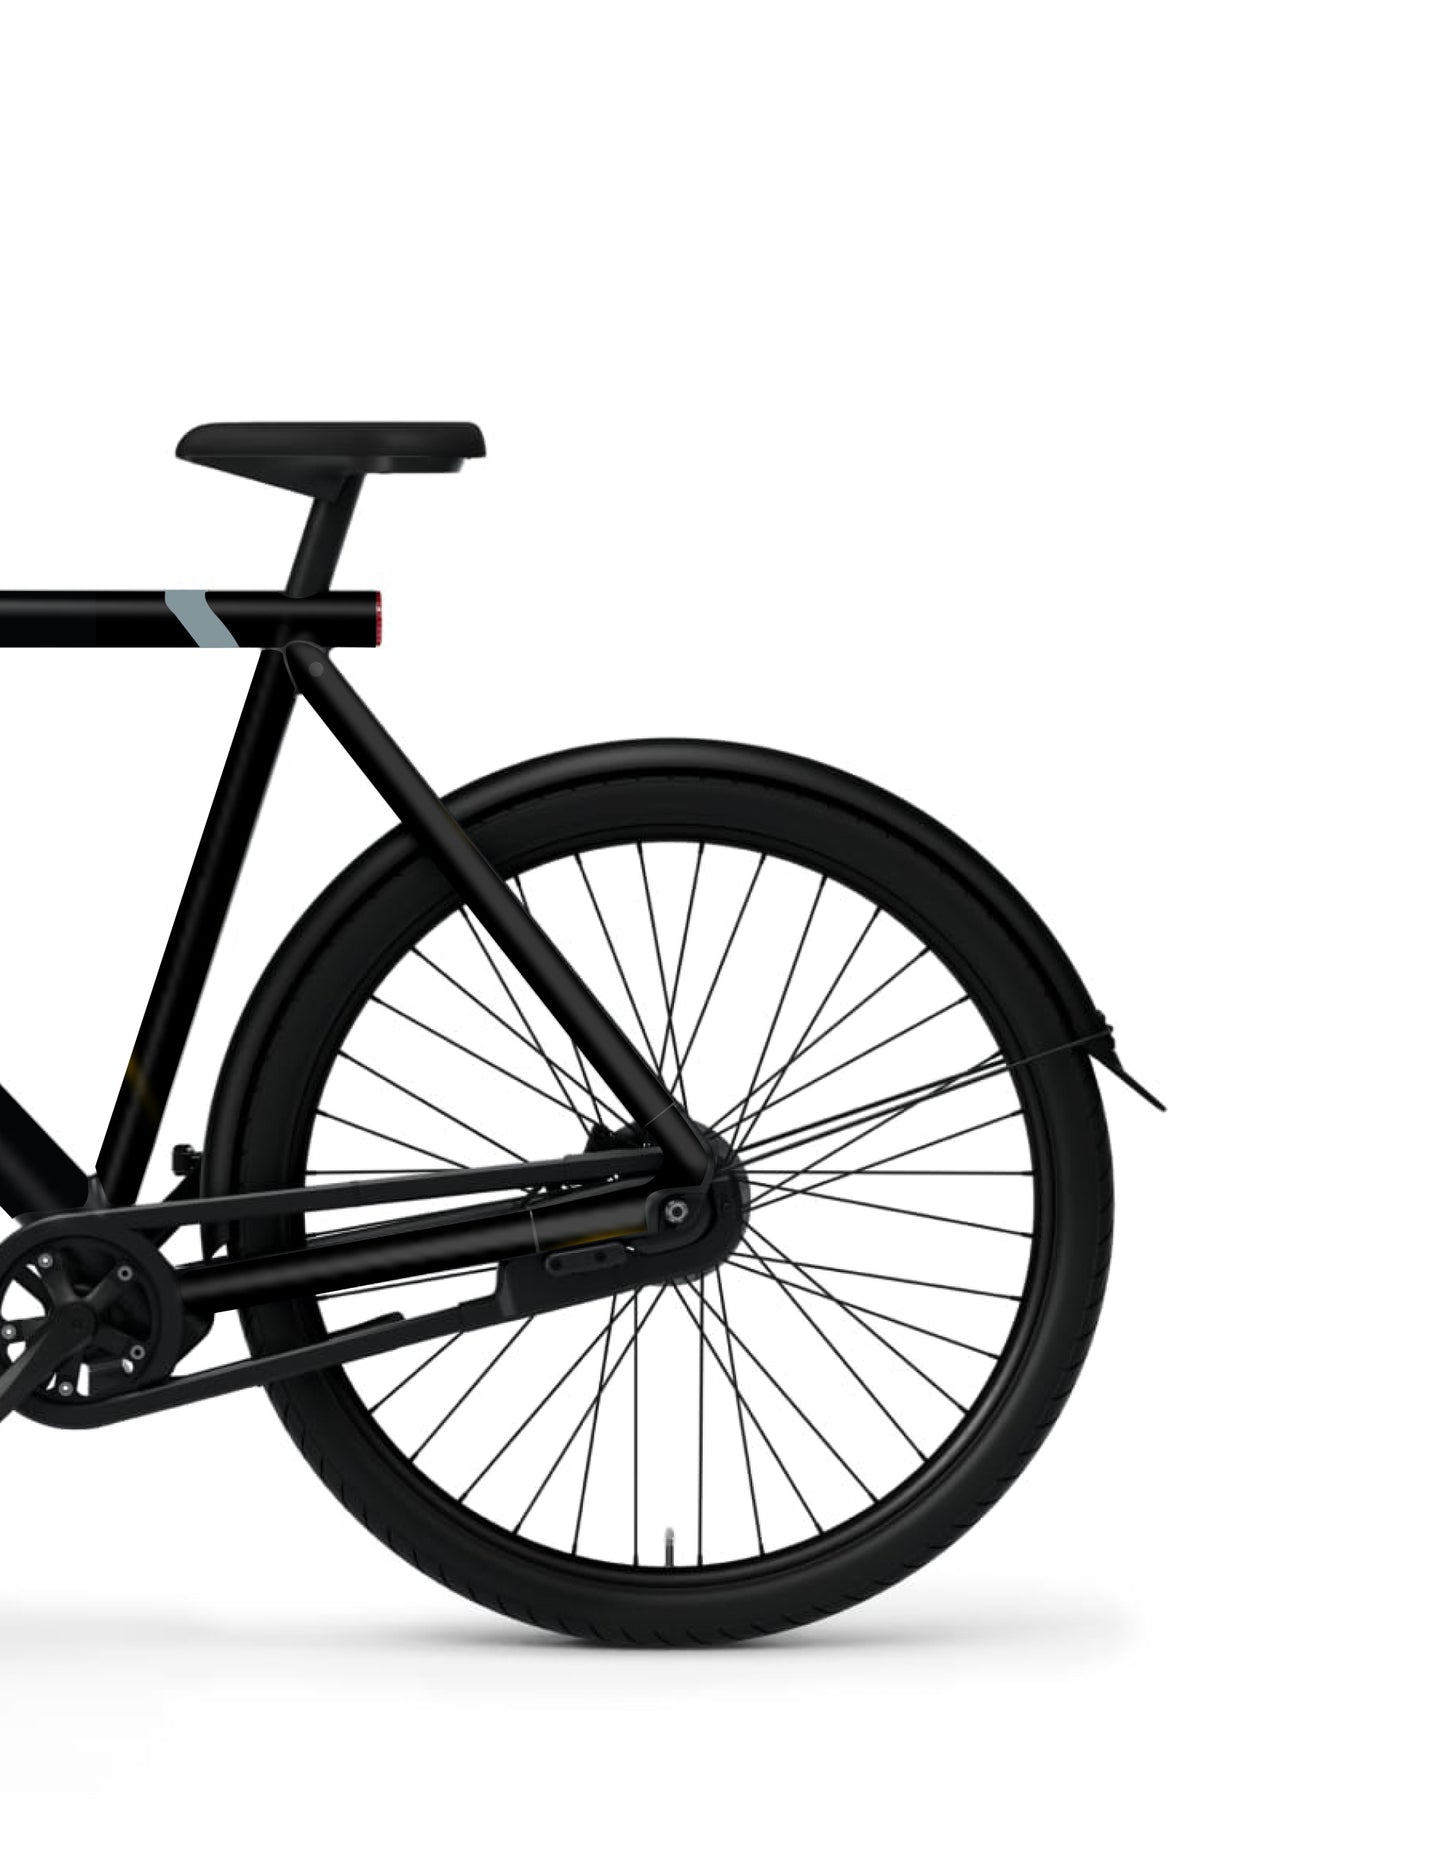 GREY HOT ROD PROTECT KIT FOR VANMOOF S2/S3